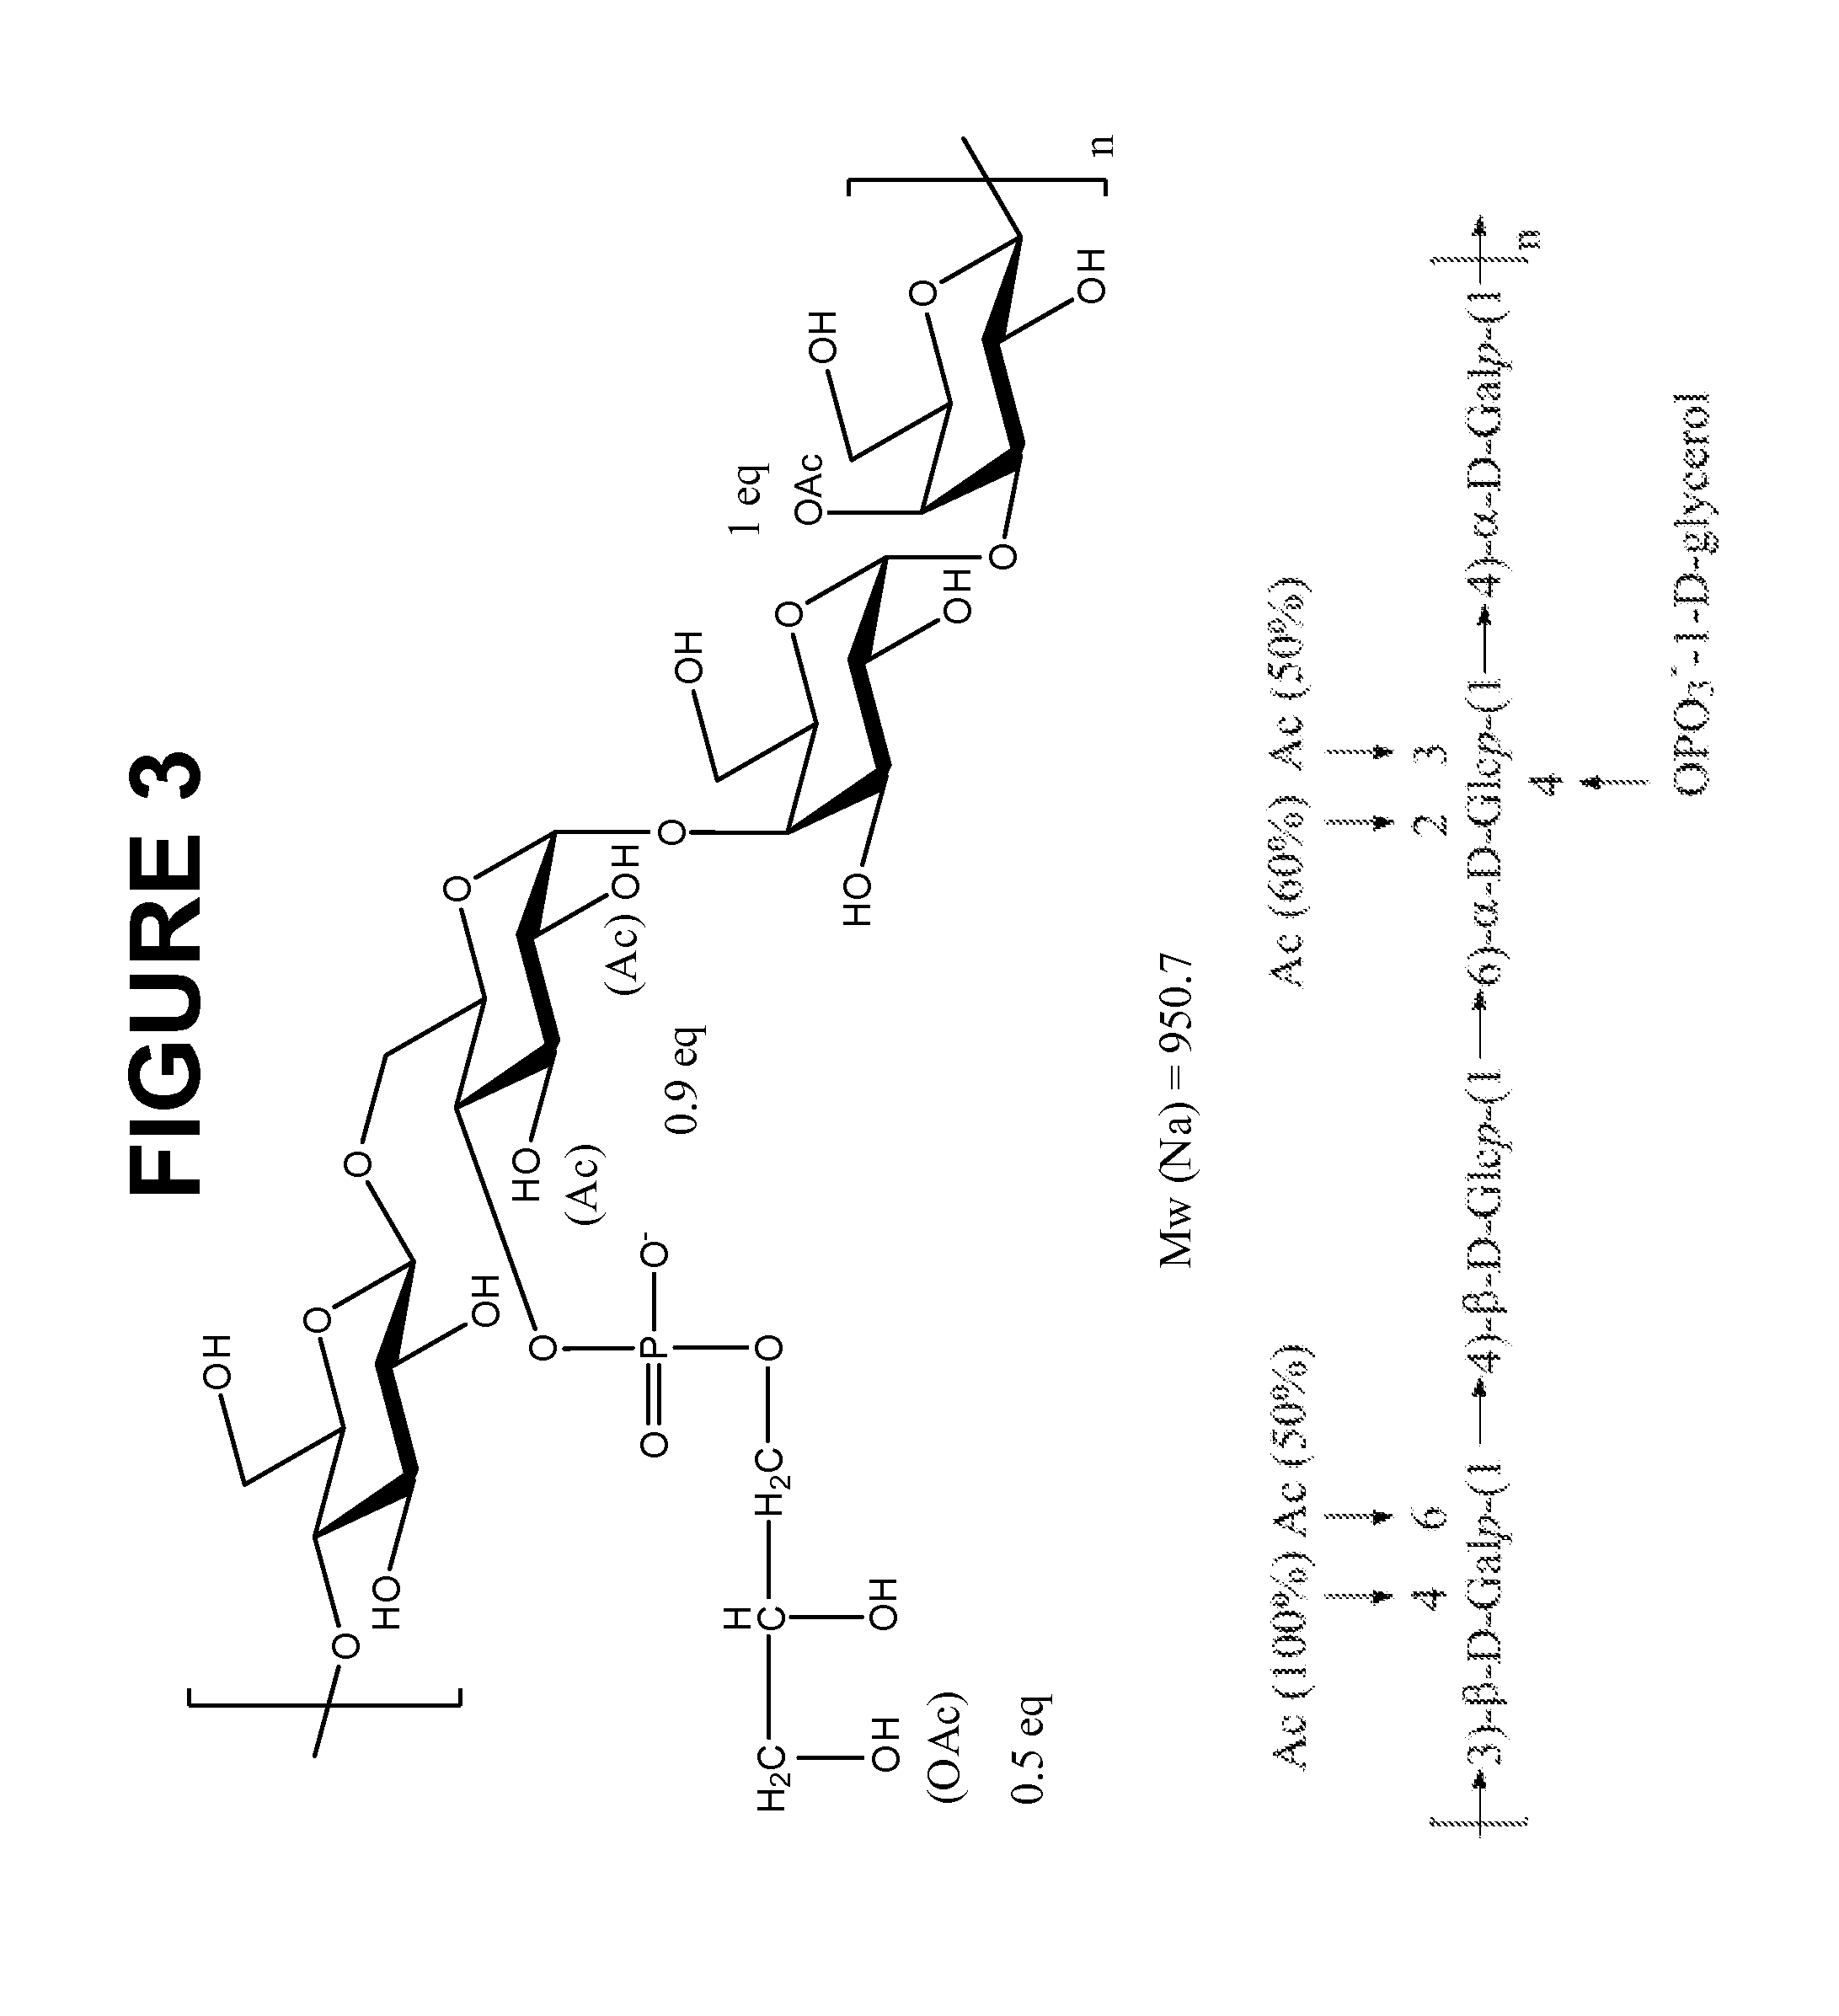 Immunogenic Compositions Comprising Conjugated Capsular Saccharide Antigens and Uses Thereof